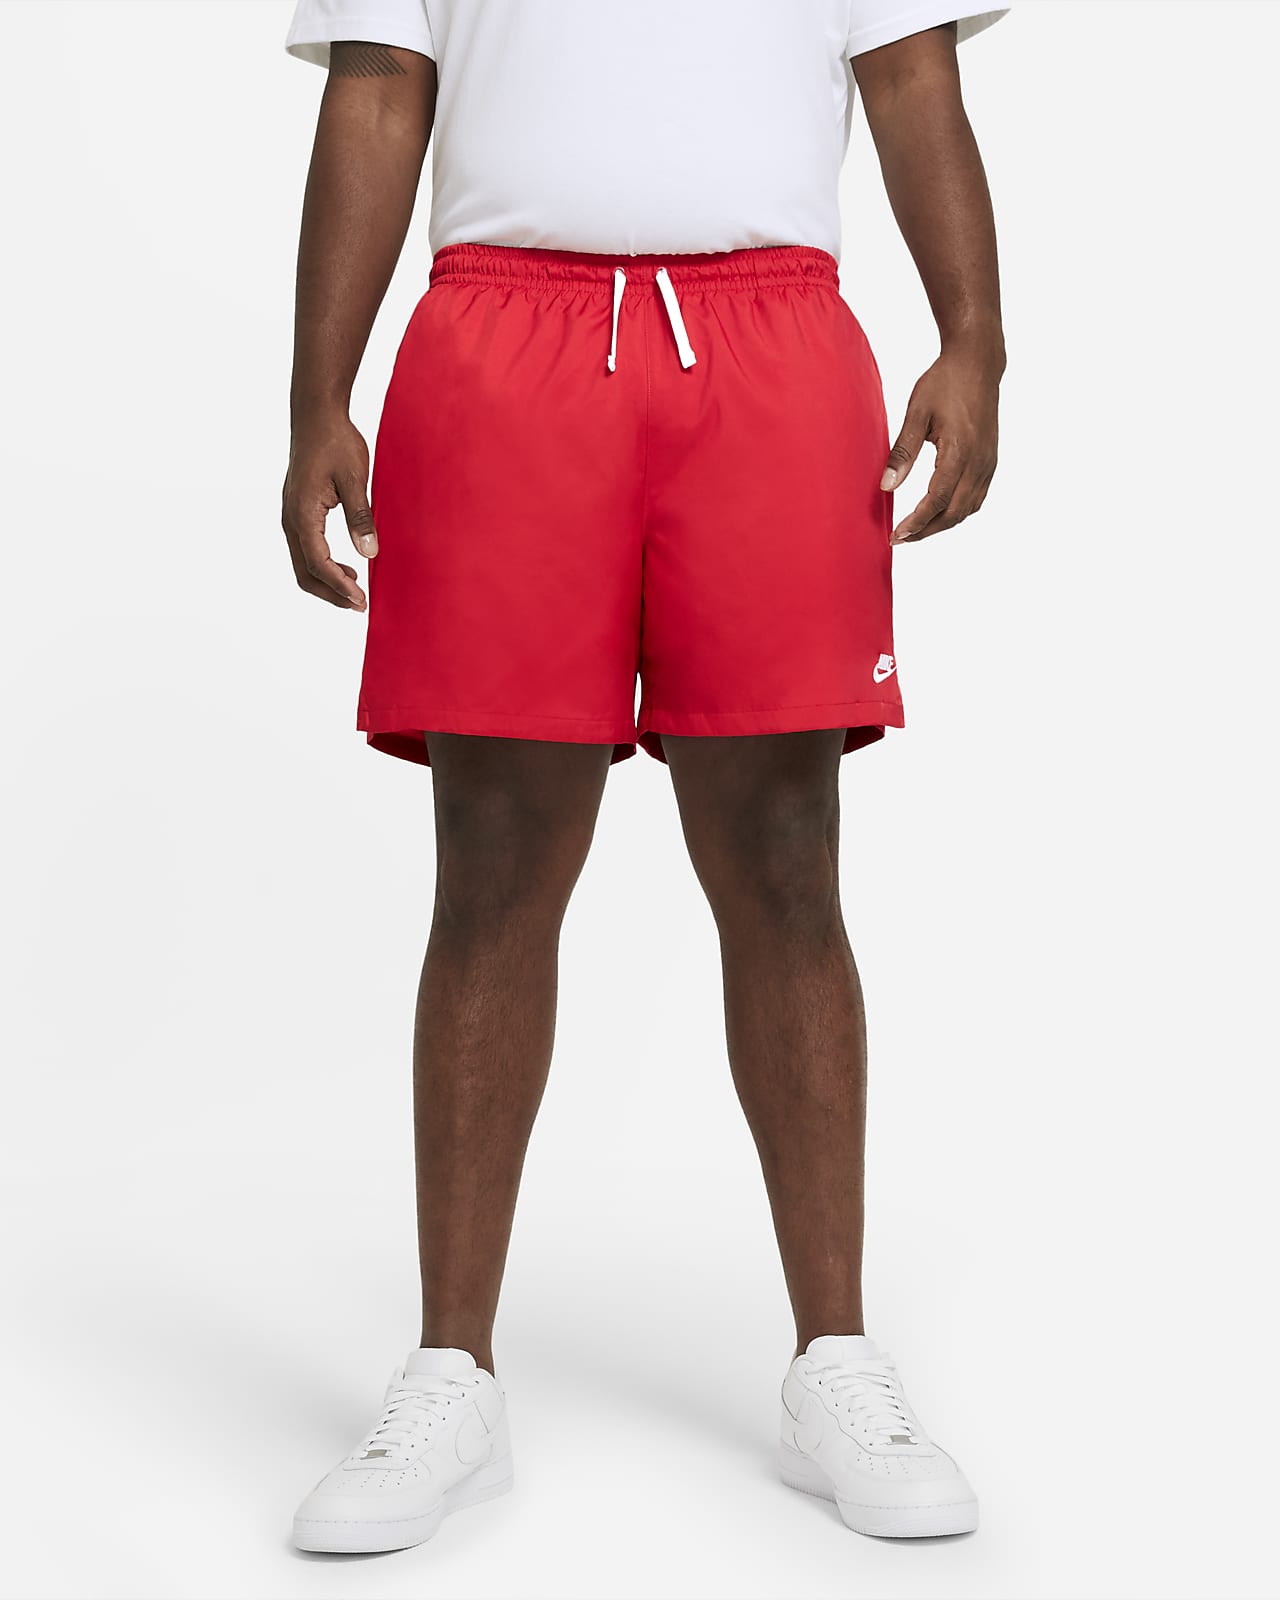 Buy > nike club essentials woven flow shorts pink > in stock